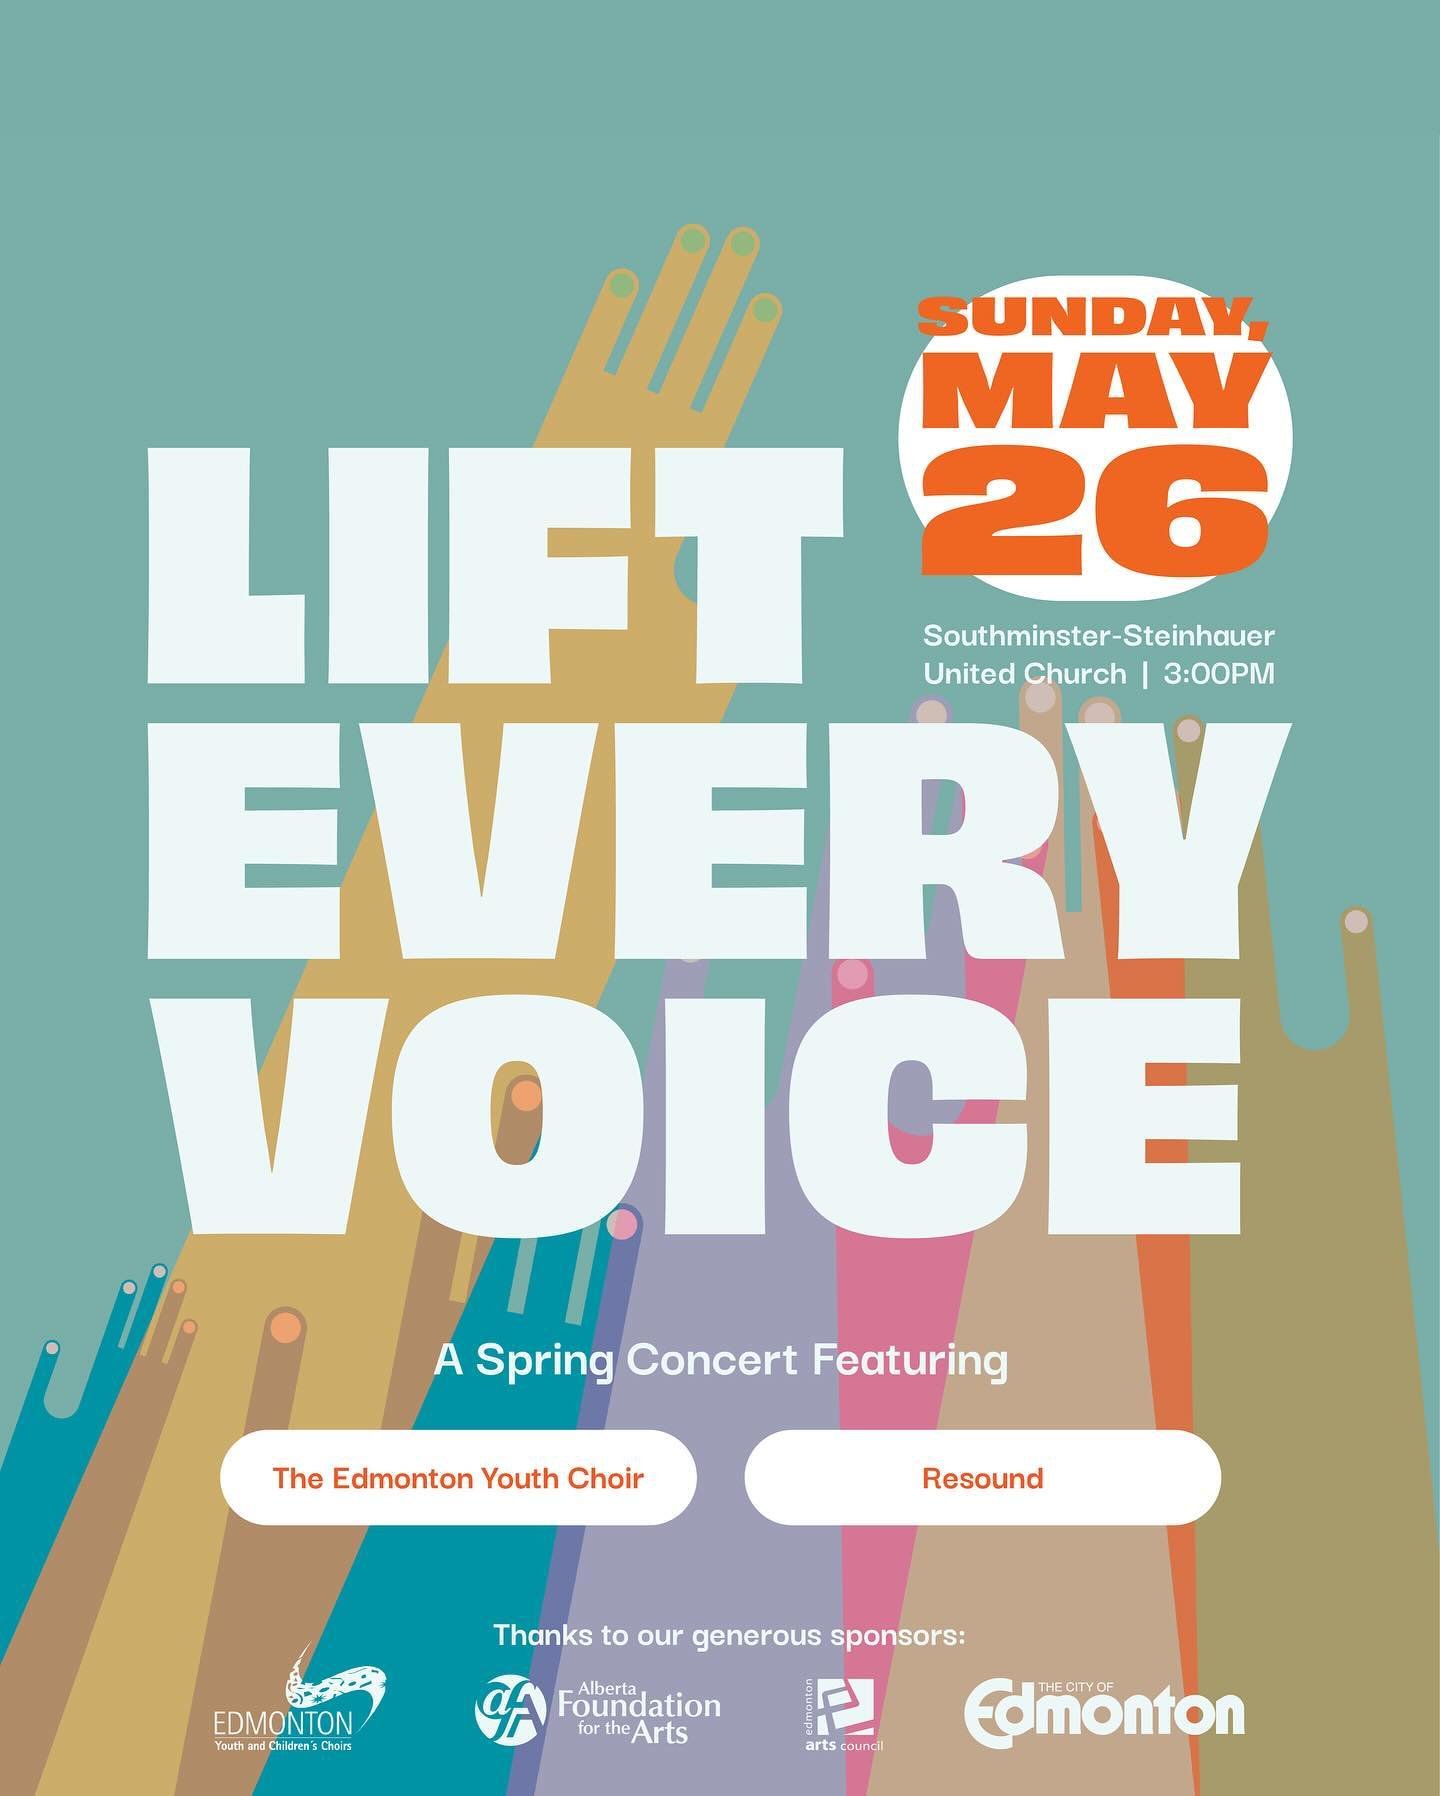 Tickets are NOW ON SALE for our Resound &amp; Youth Choir Spring Concert: 🌼Lift Every Voice 🌼

Come for the great singing, stay for the treats! 

This concert will feature works from all around the world, celebrating voices that haven&rsquo;t alway